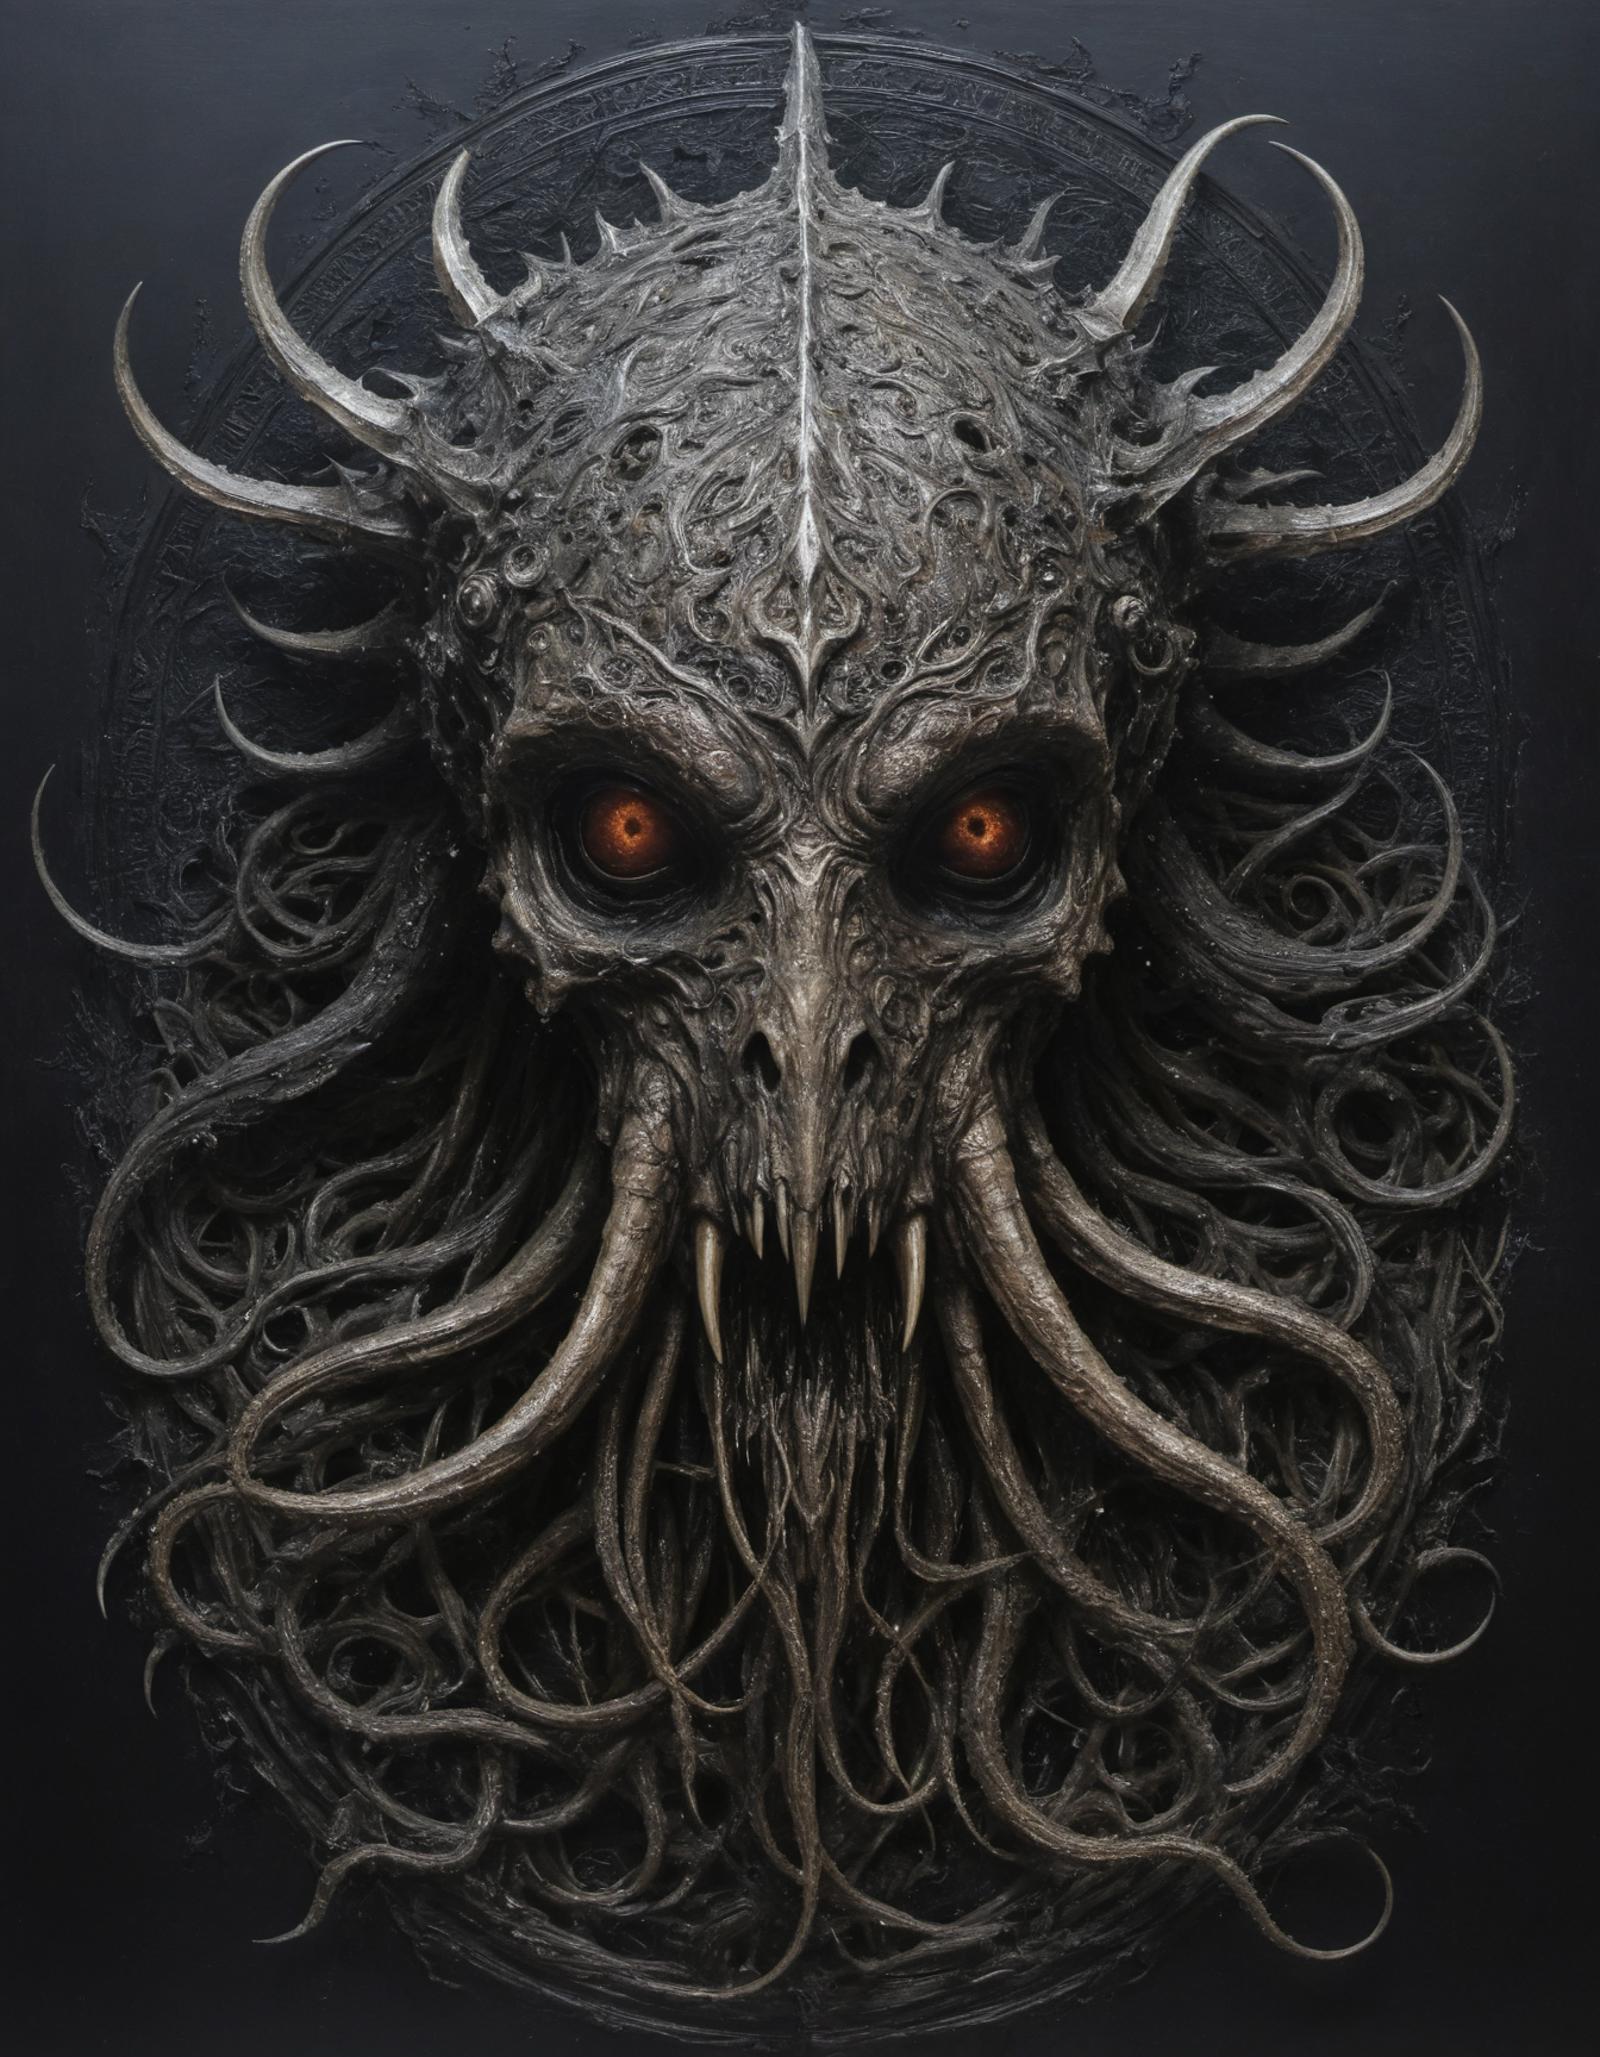 A grotesque and spooky image of a demon with fangs, horns, and multiple eyes.